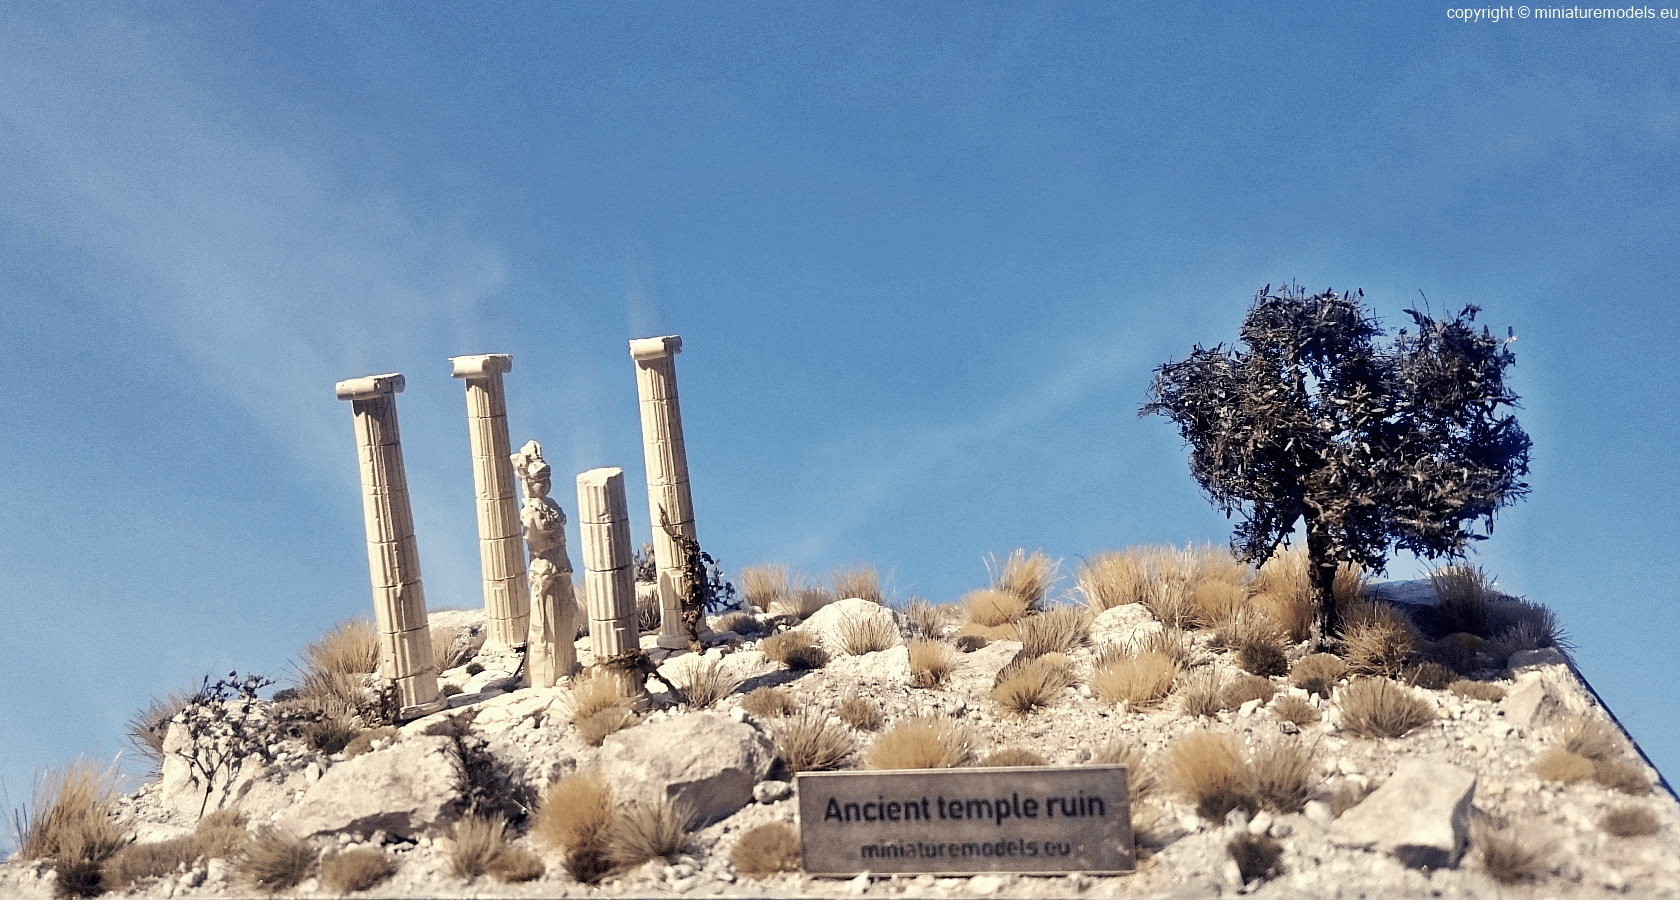 Miniature model of ancient temple ruin with sky and sun